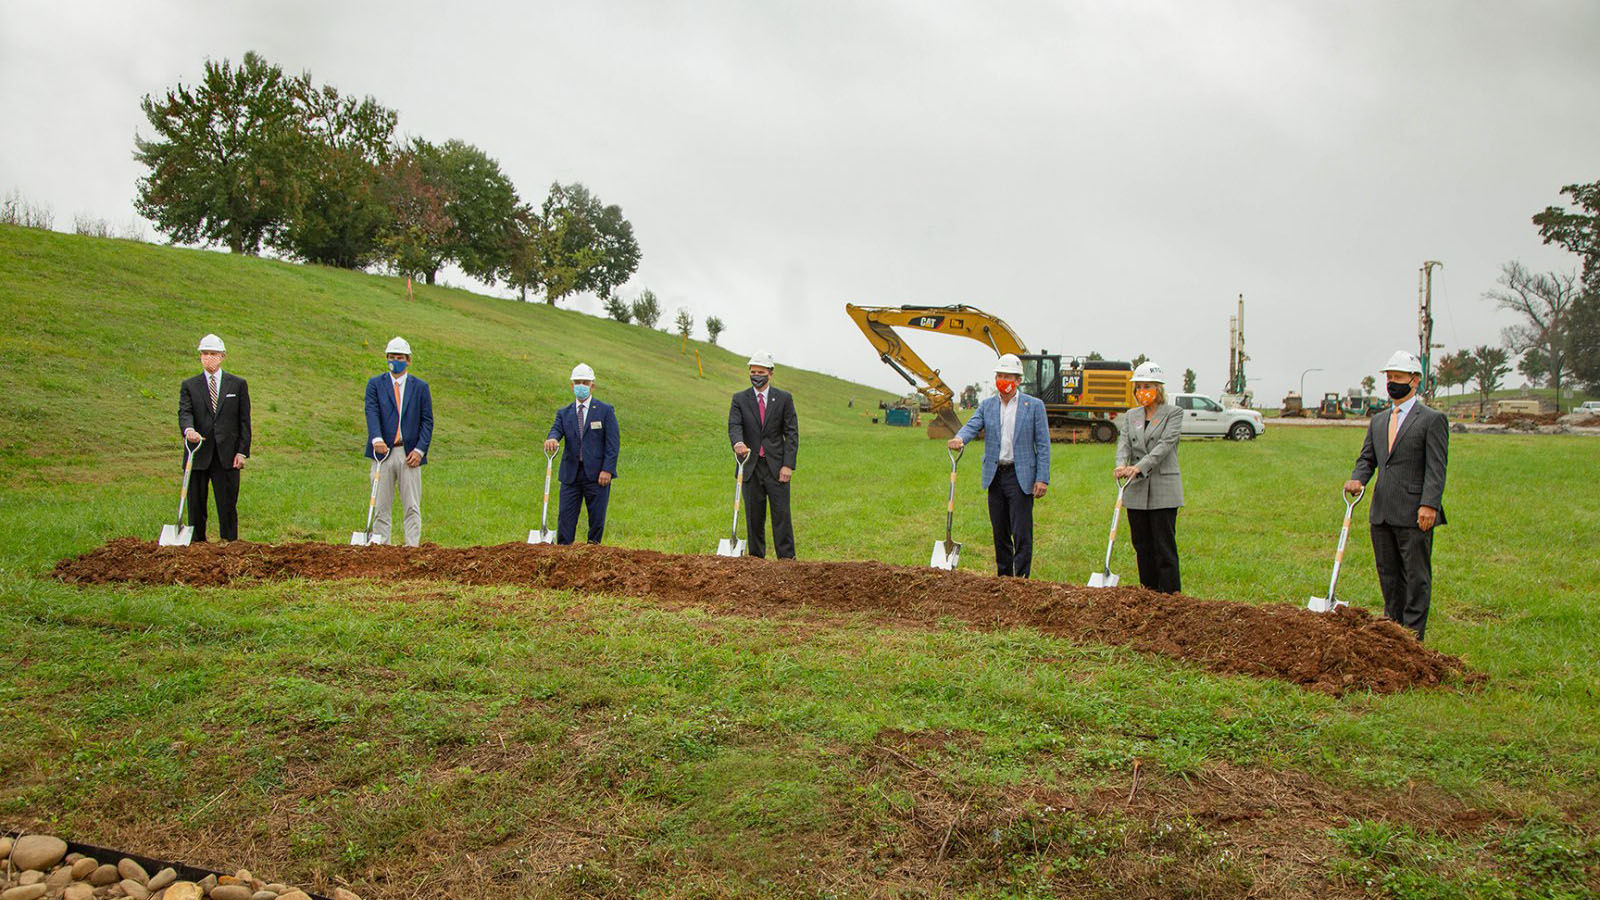 Seven people in hardhats pose with shovels in a groundbreaking event at Cherokee Farm